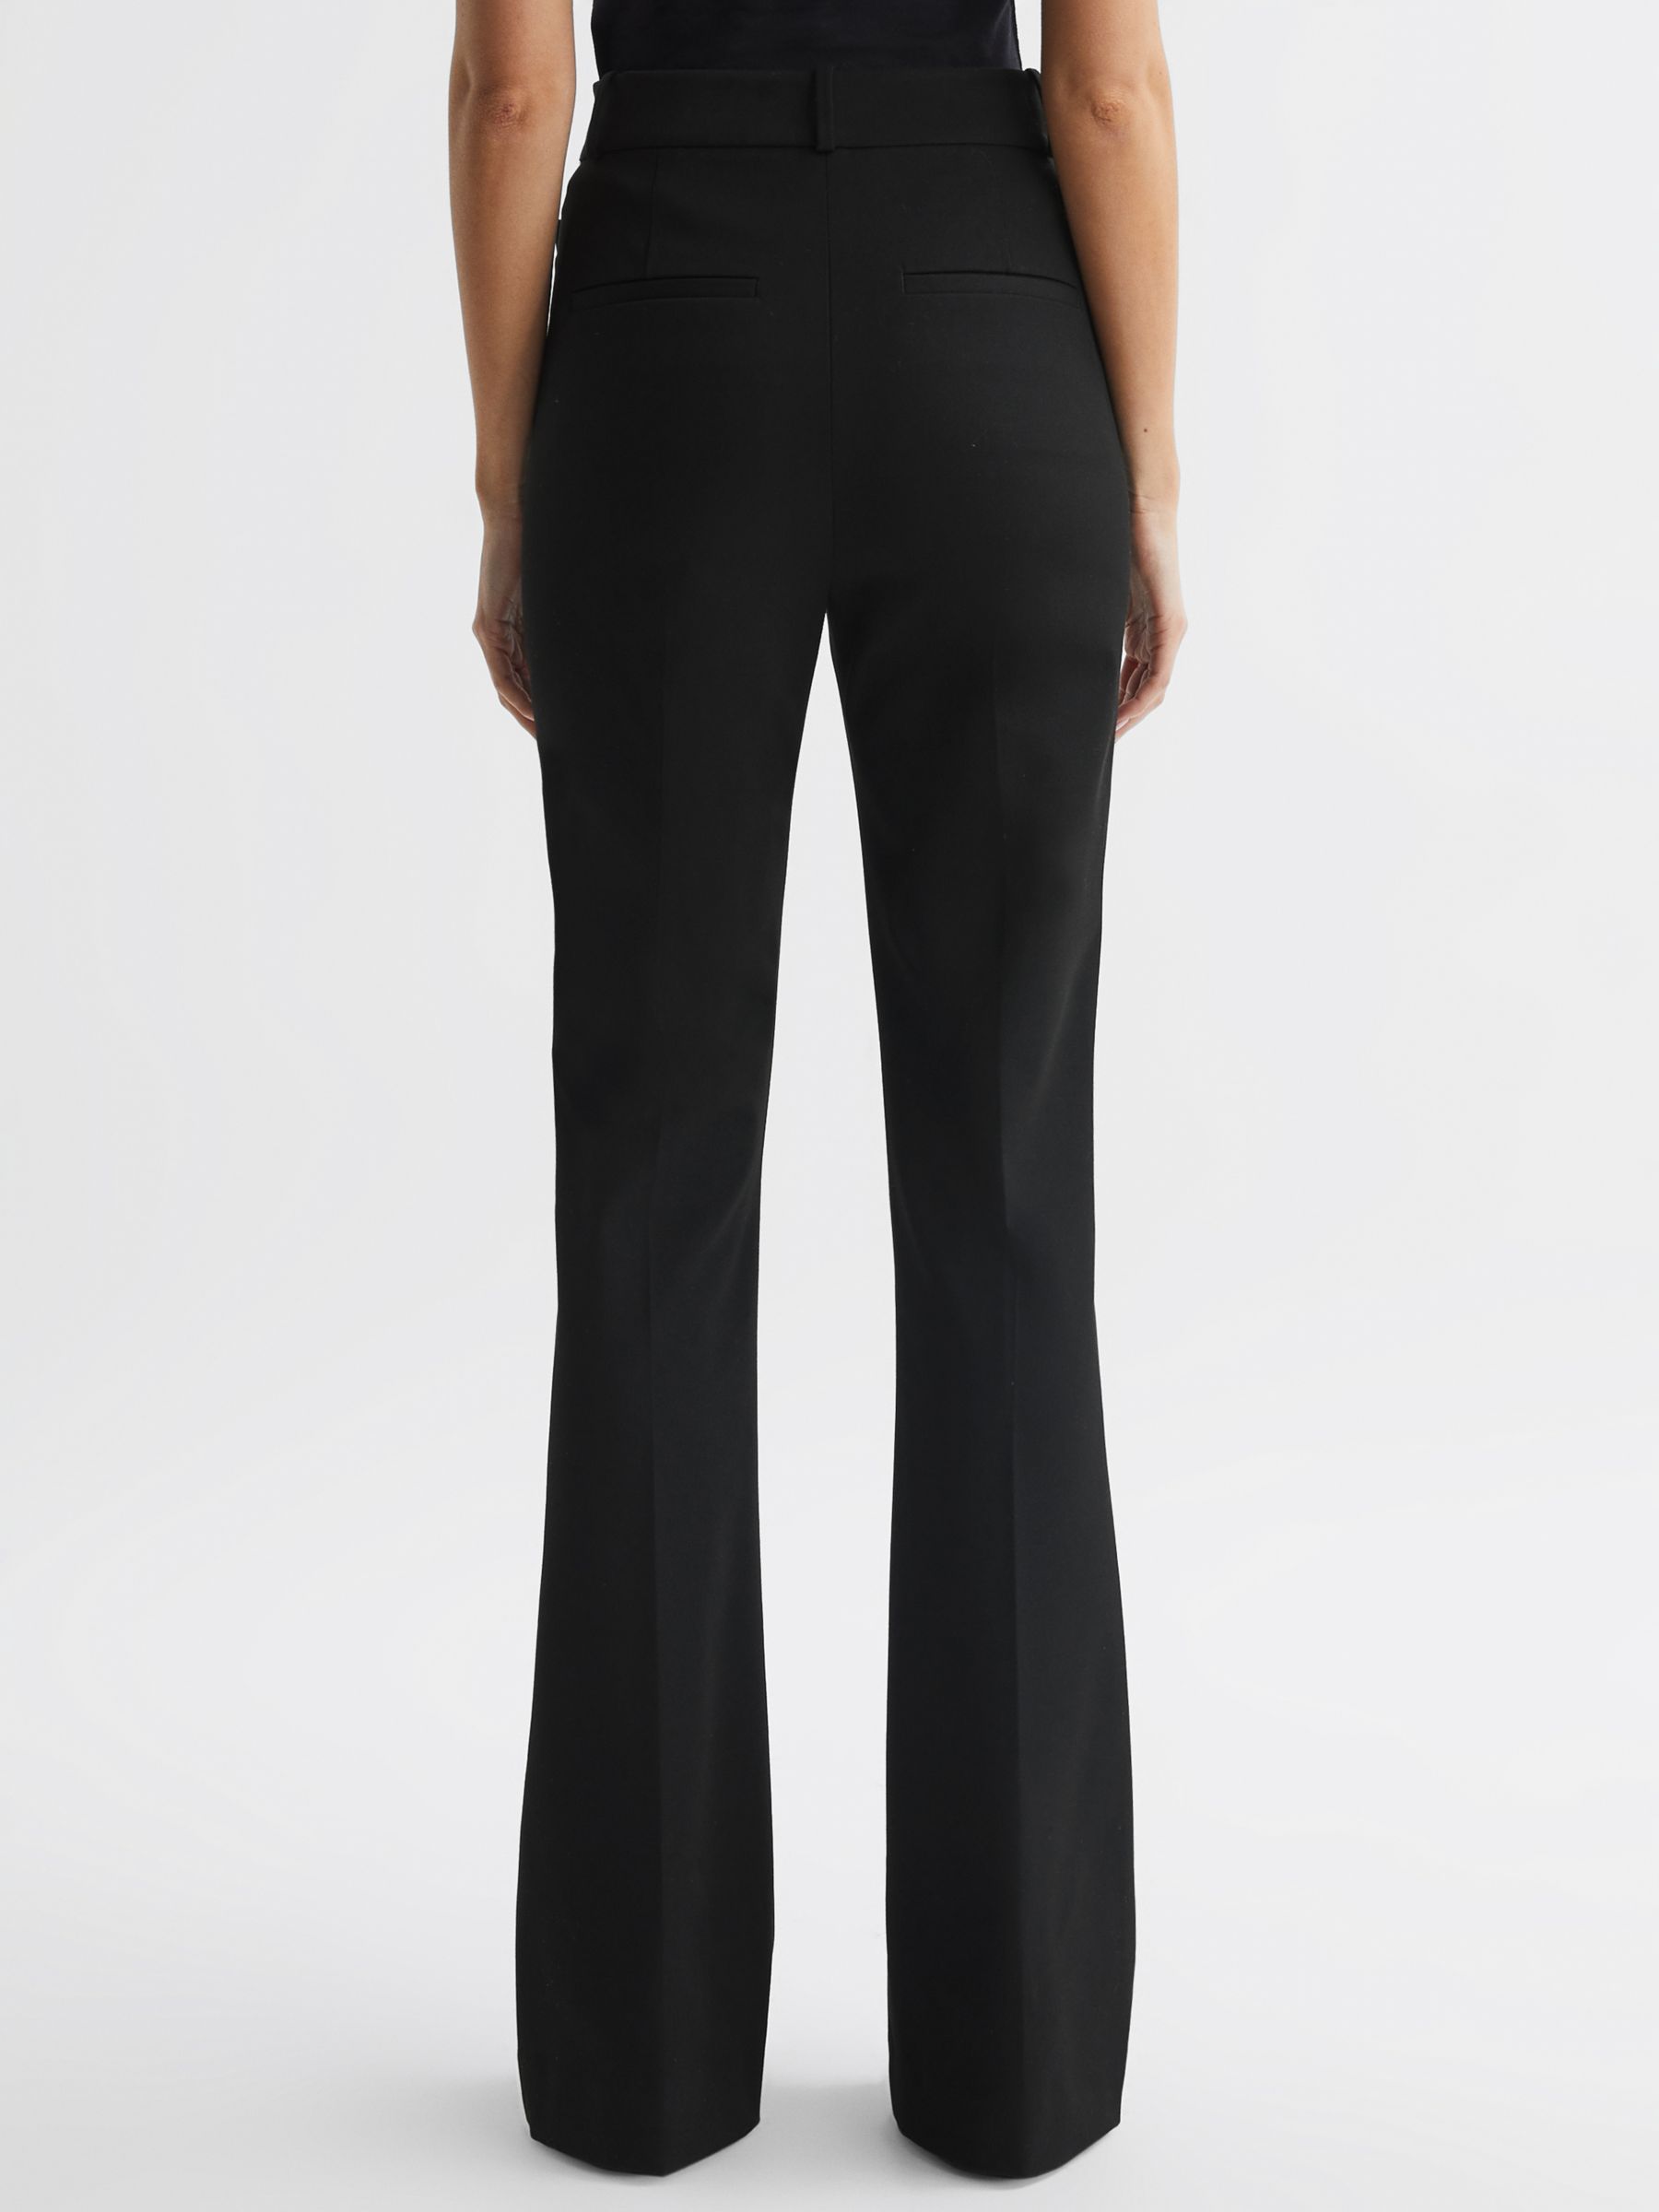 Buy Reiss Petite Dylan Flared Trousers Online at johnlewis.com